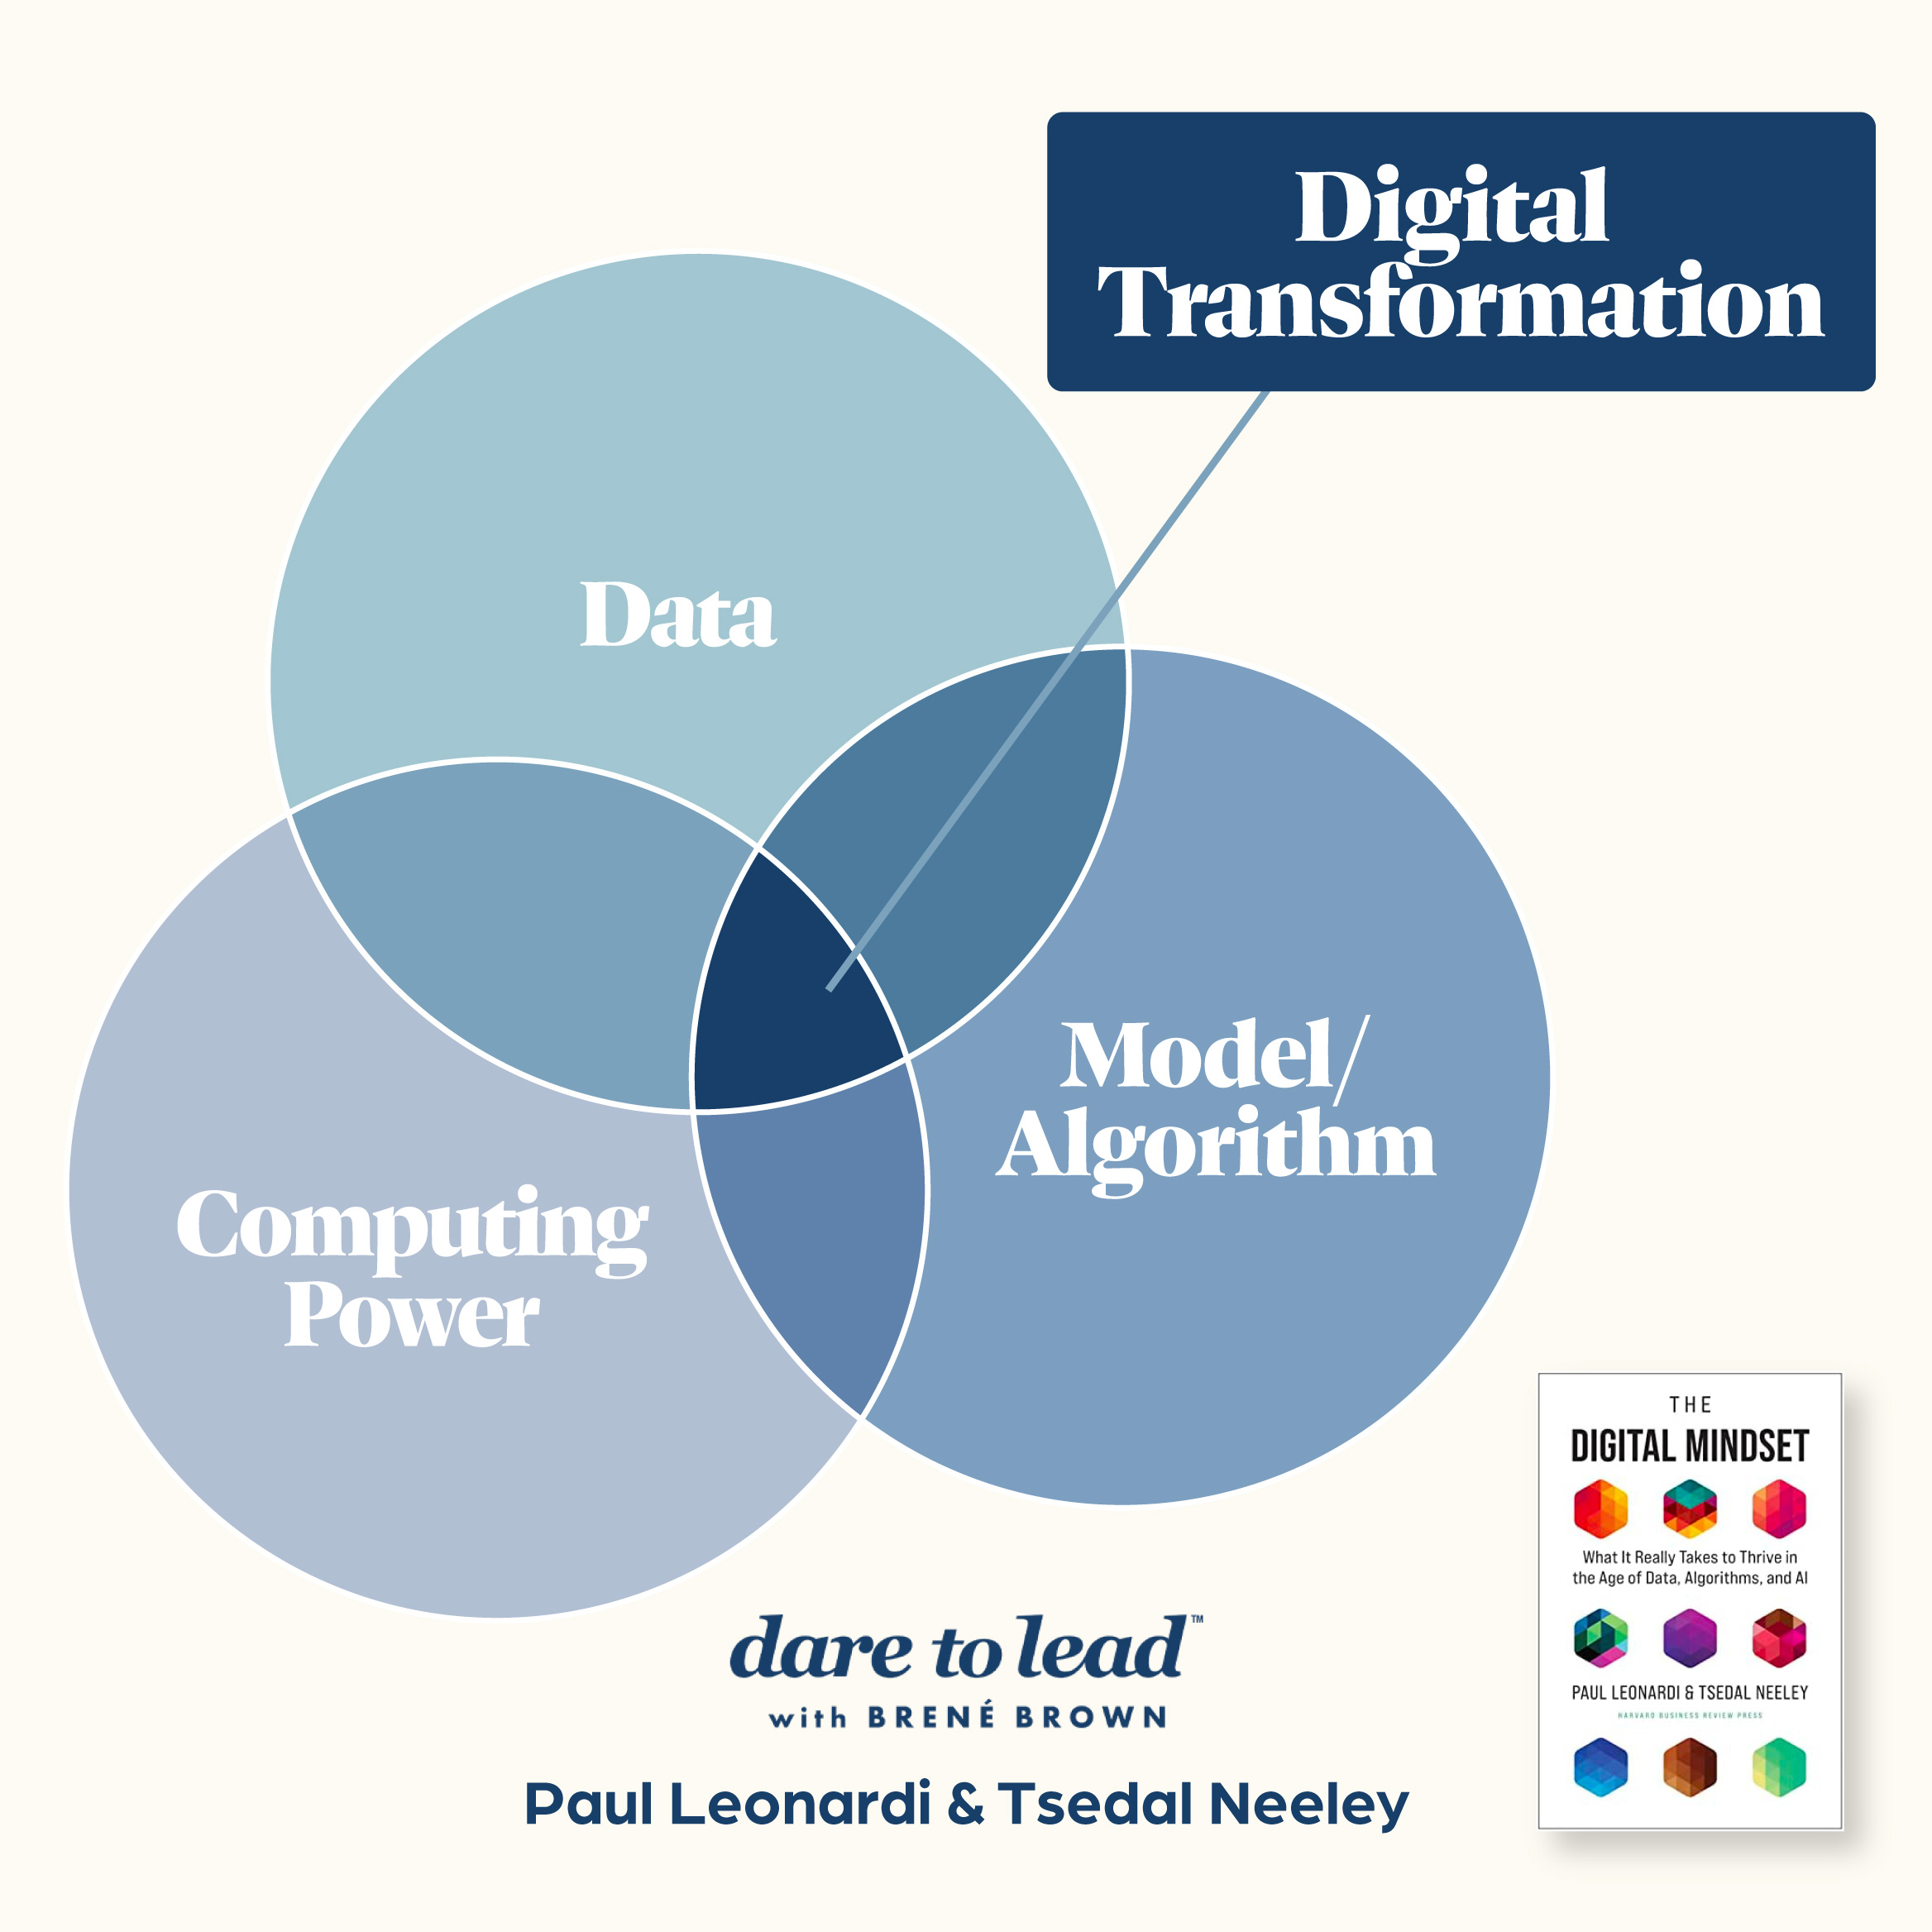 A graphic about digital transformation, based on the work of Paul Leonardi and Tsedal Neeley, authors of The Digital Mindset